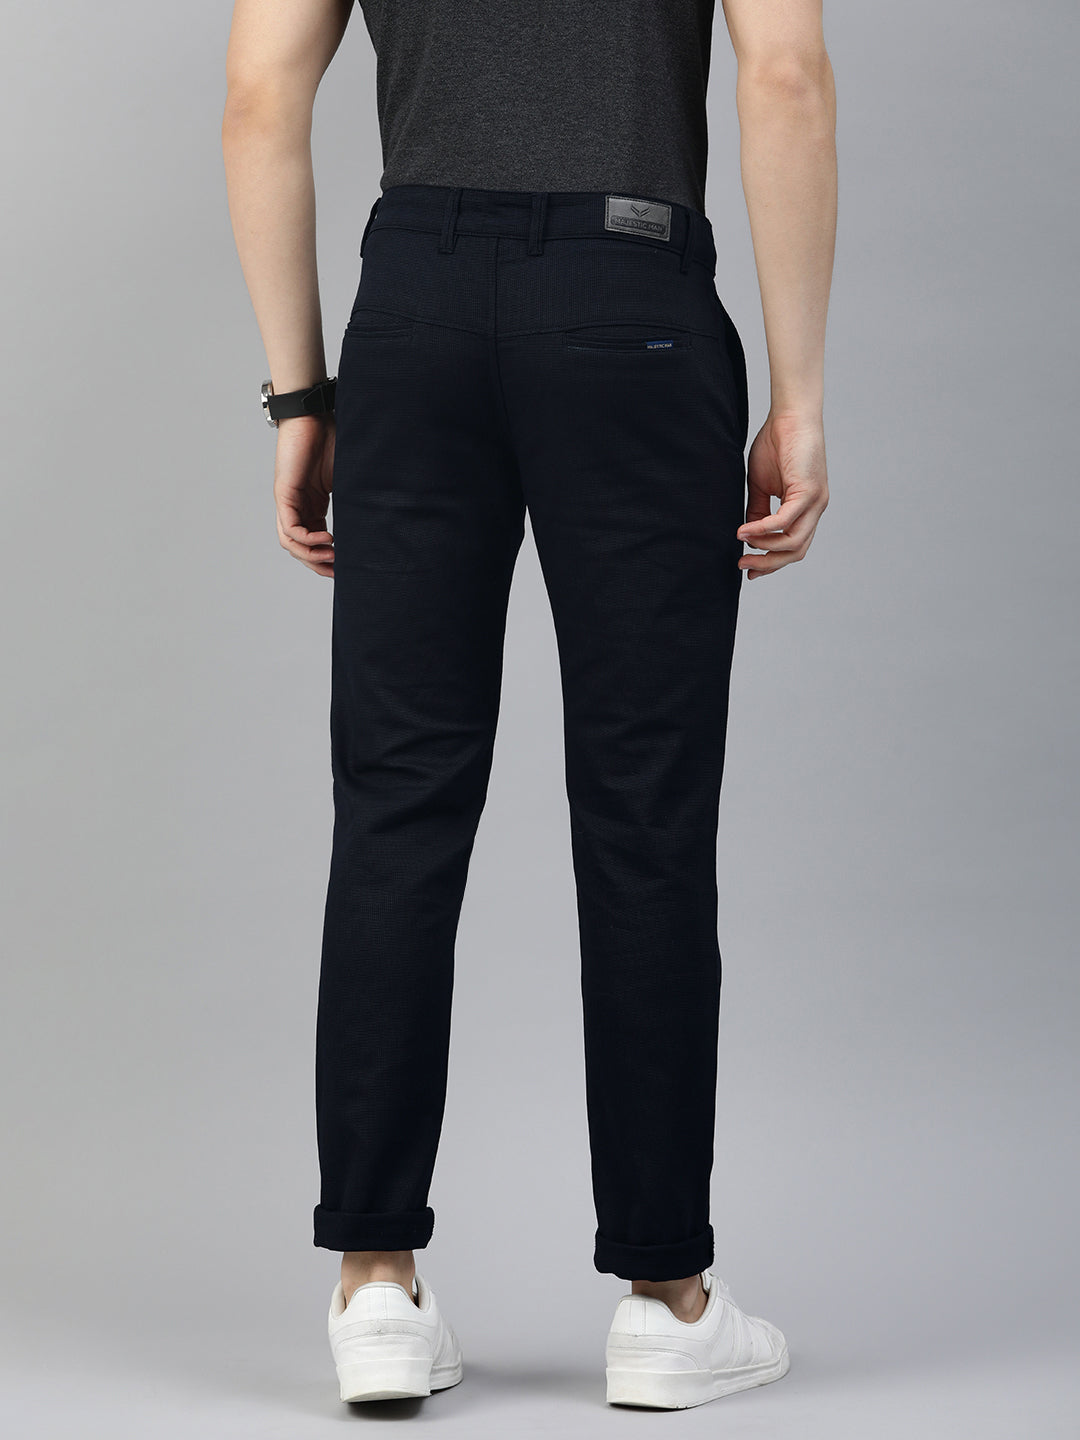 Majestic Man Casual textured Trouser - Navy Blue